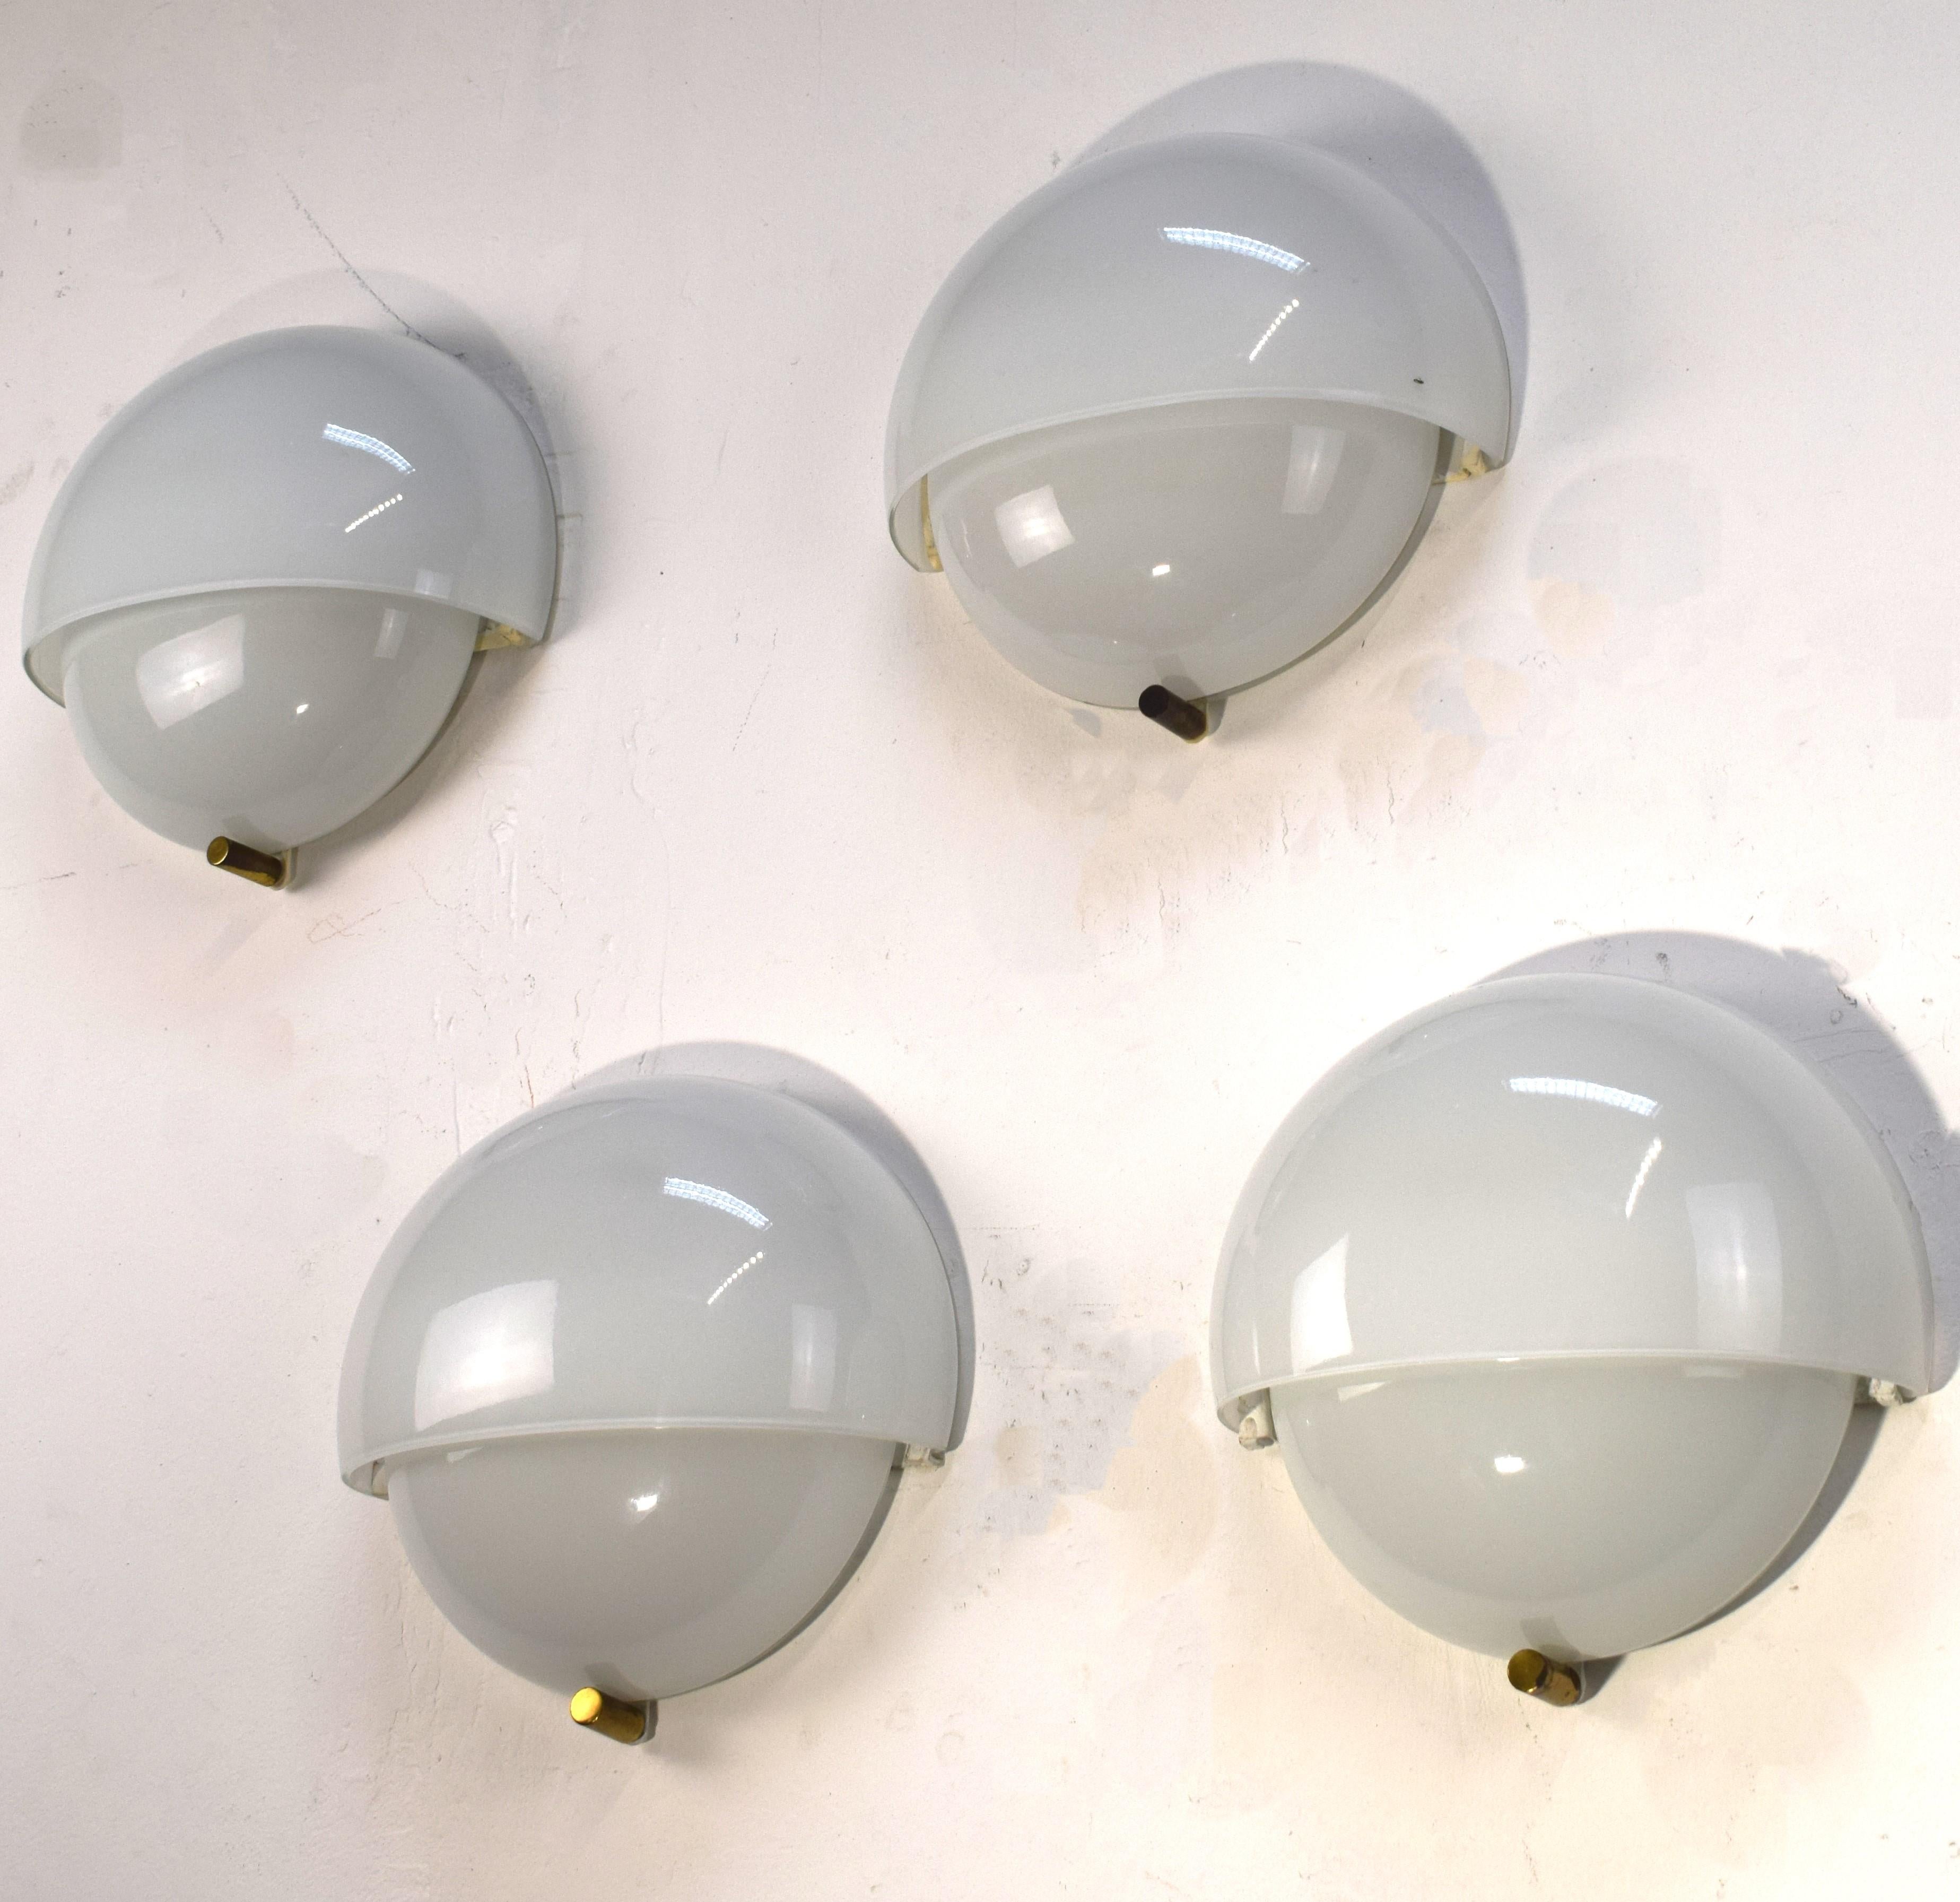 Set of 4 wall lamp model. Mania by Vico Magistretti for Artemide, Italy, 1970s.

Dimensions: H= 24 cm; W= 23 cm; D= 10 cm.